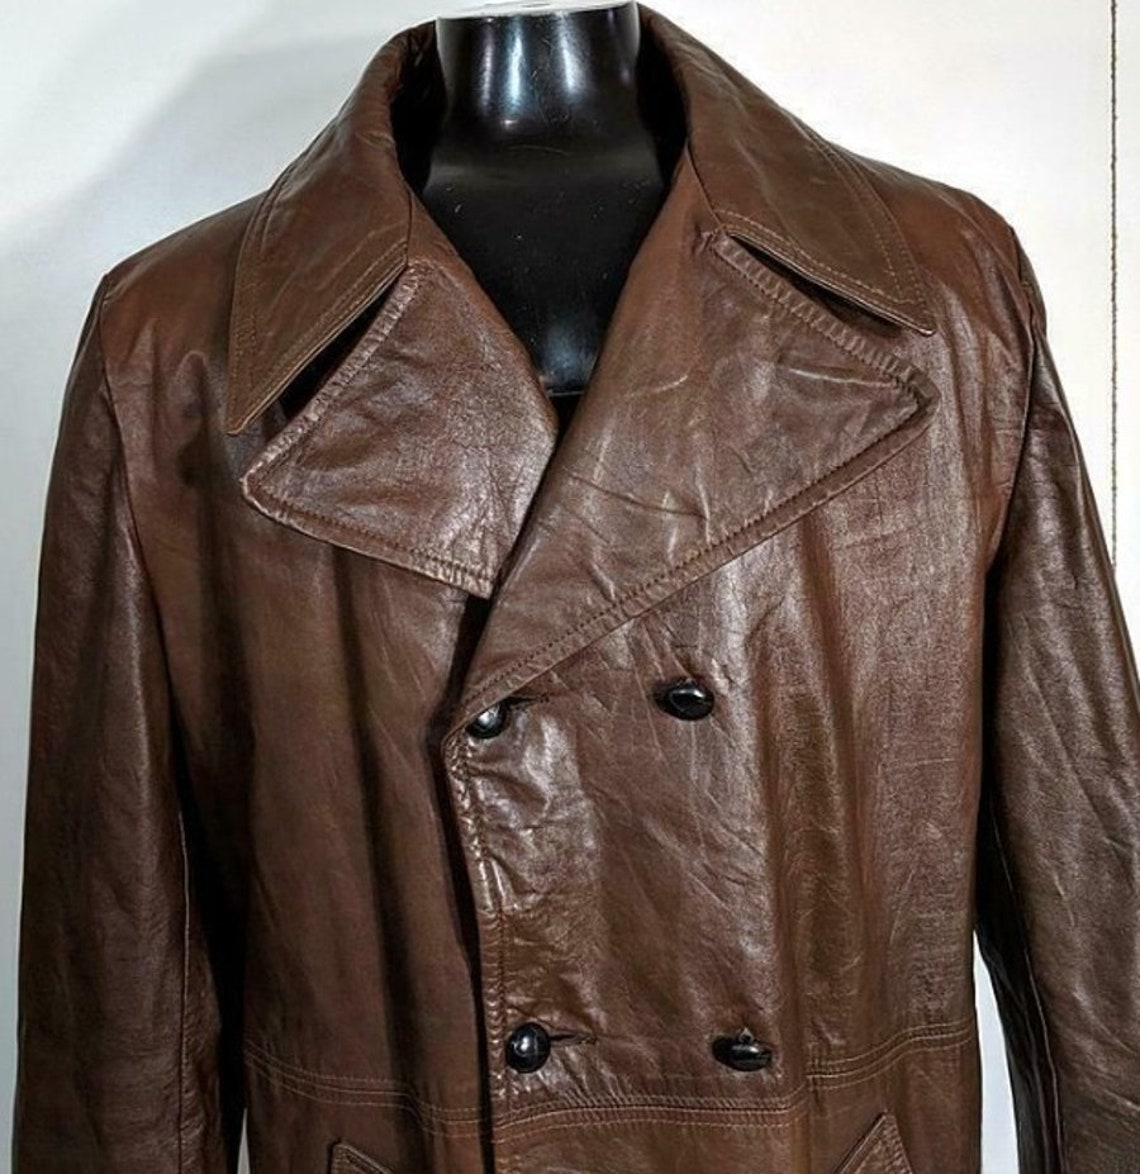 Mens BROWN Leather Trench Coat German Military Real Leather - Etsy